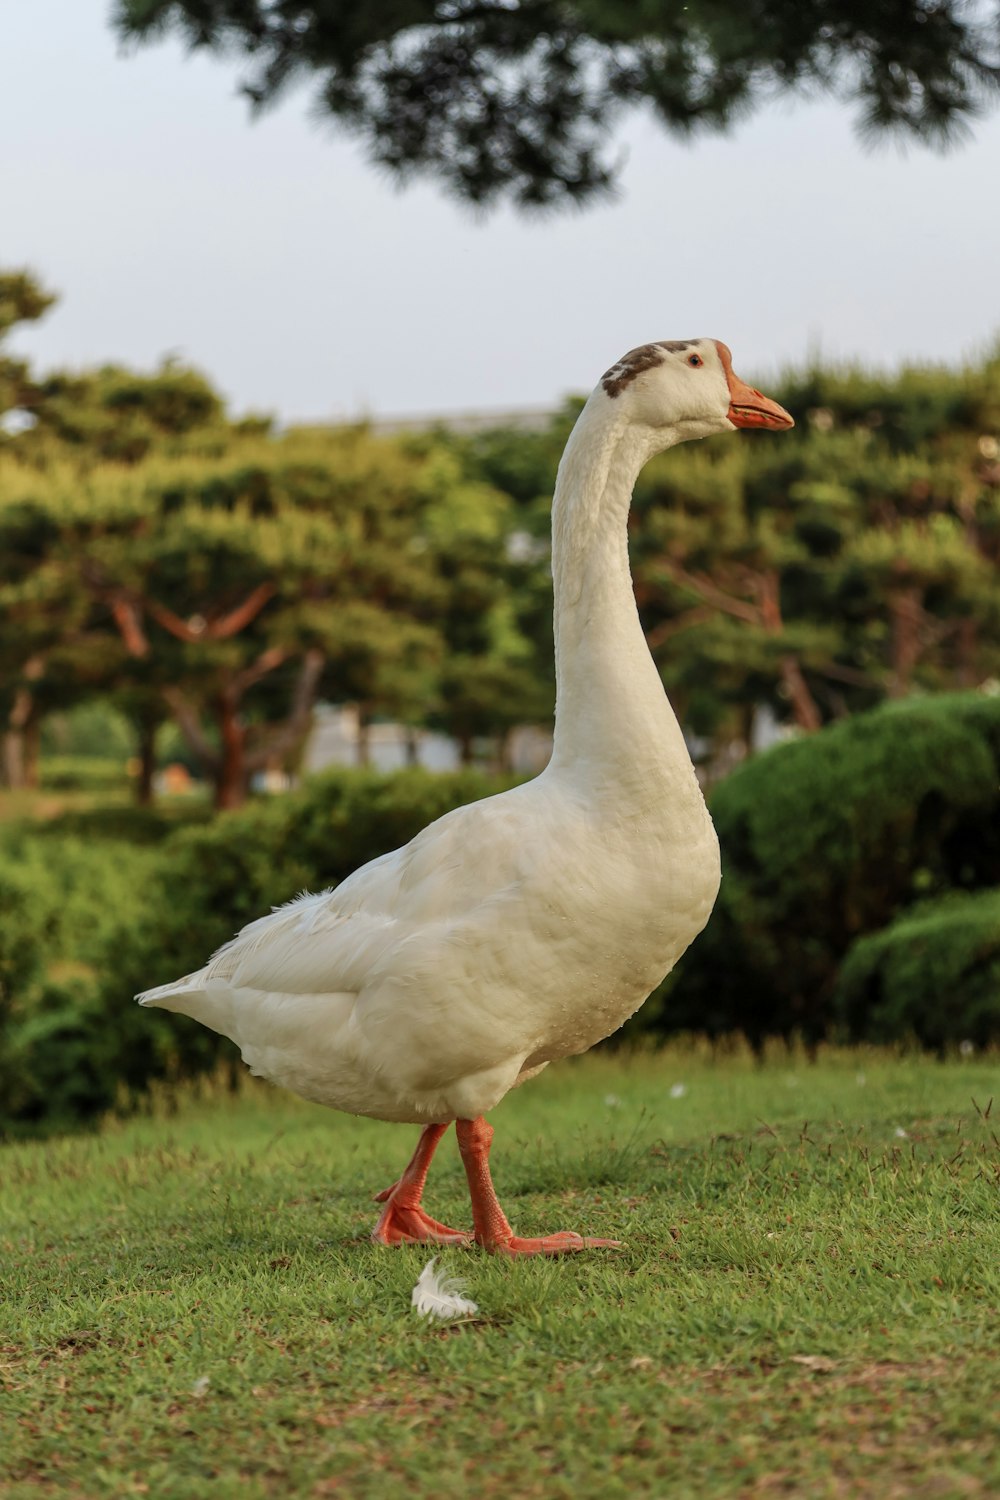 a goose standing on grass